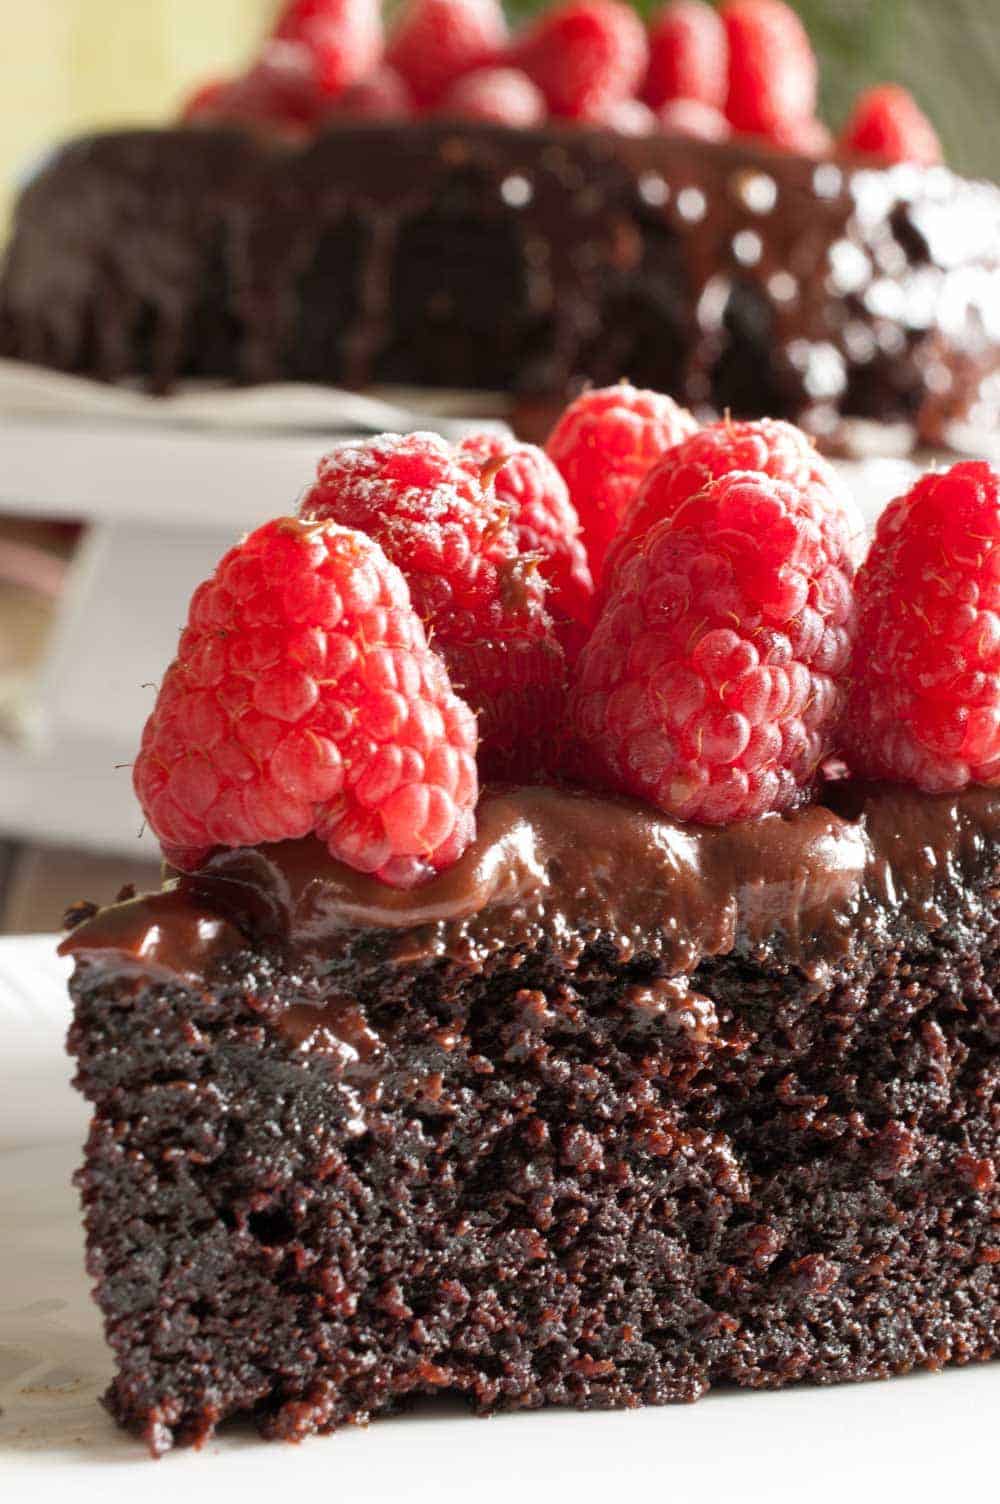 Incredibly moist and delicious chocolate cake without butter